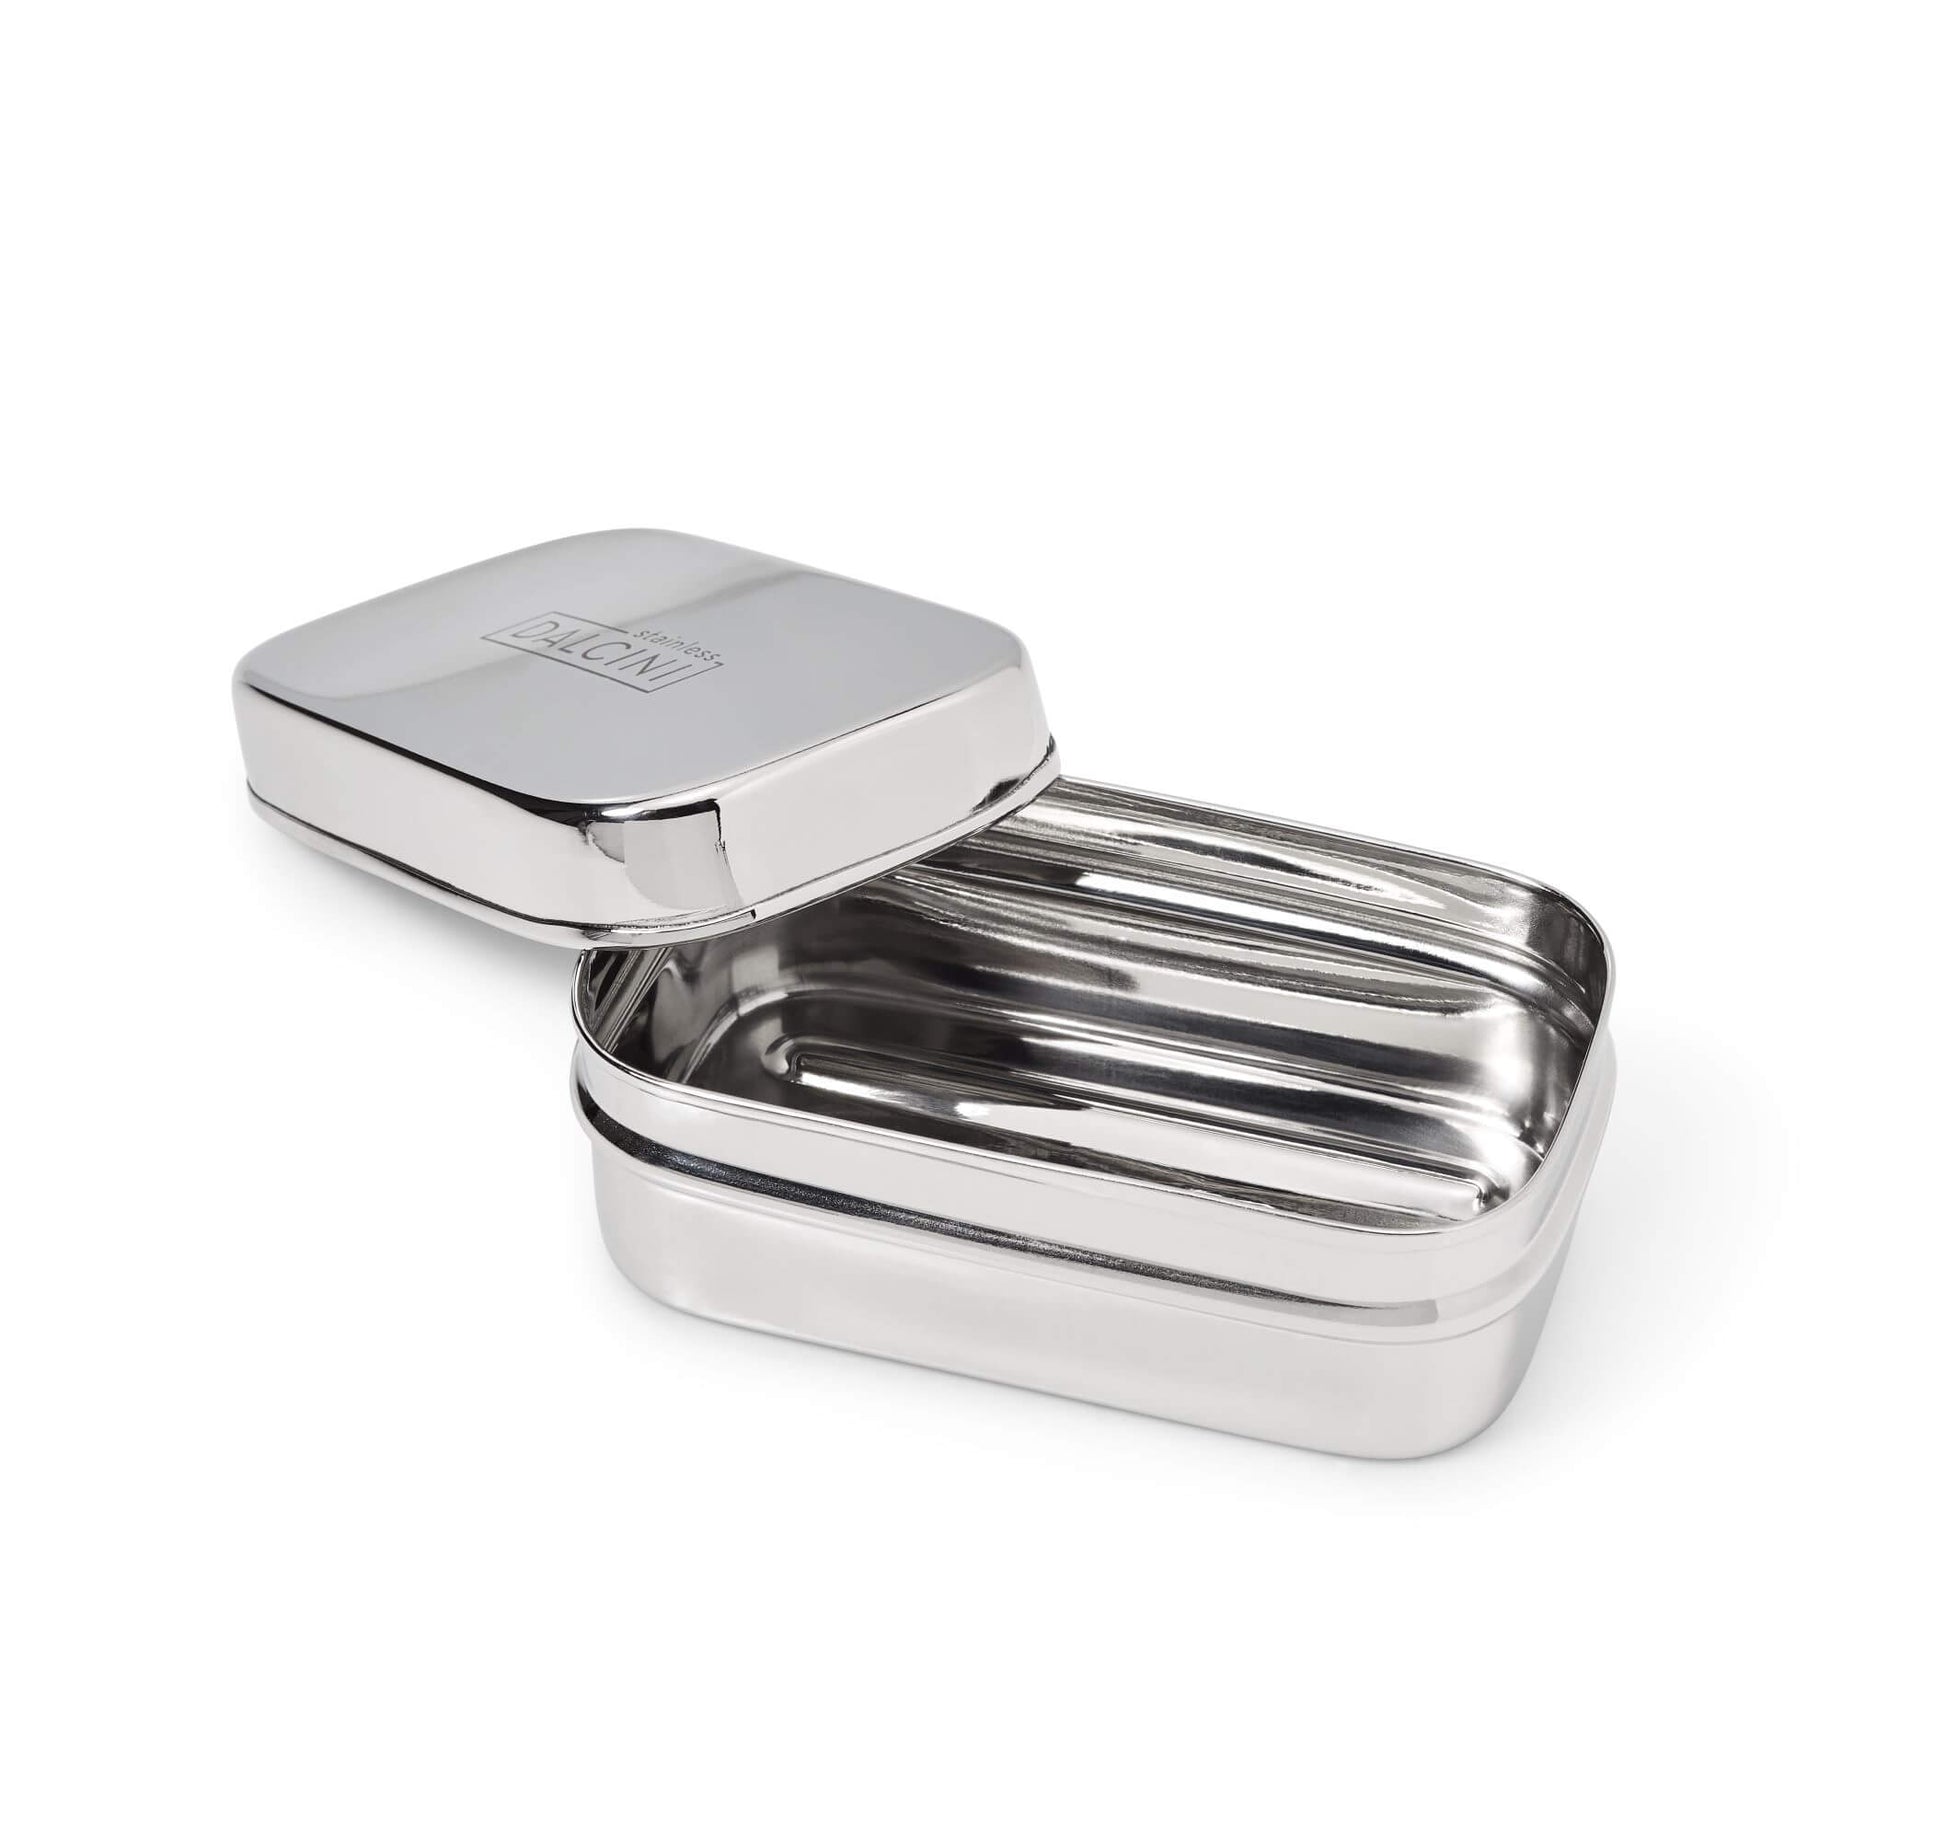 Open food-grade stainless steel soap dish